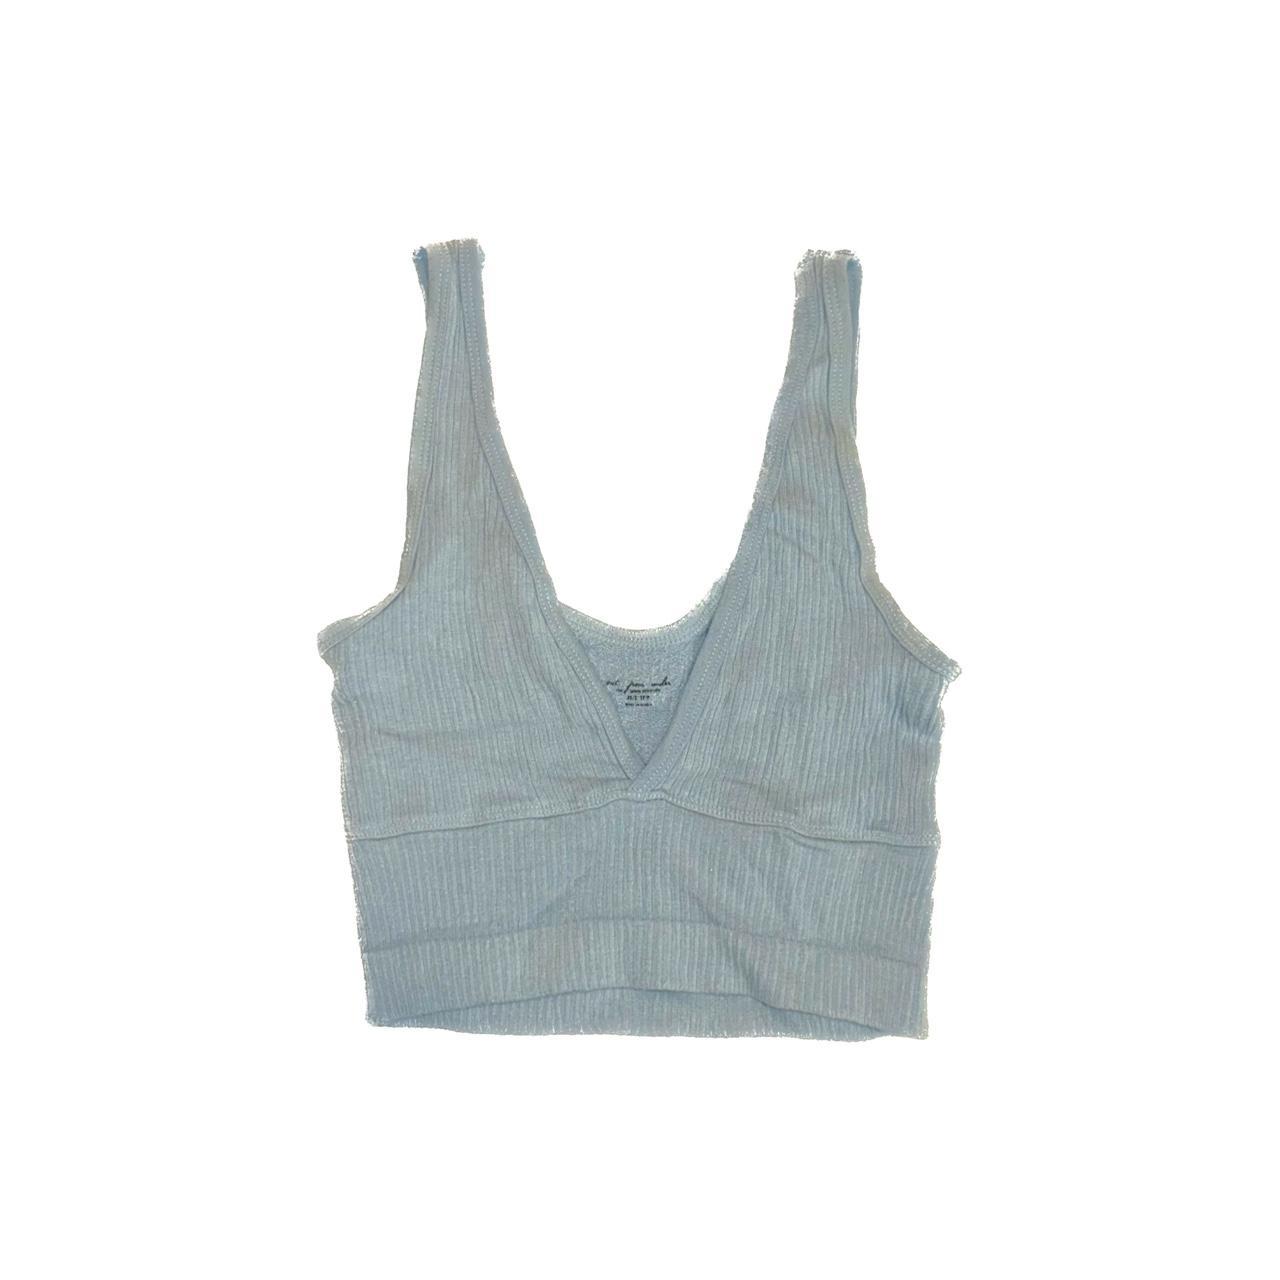 Out From Under Drew Seamless Surplice Bra Top in Blue